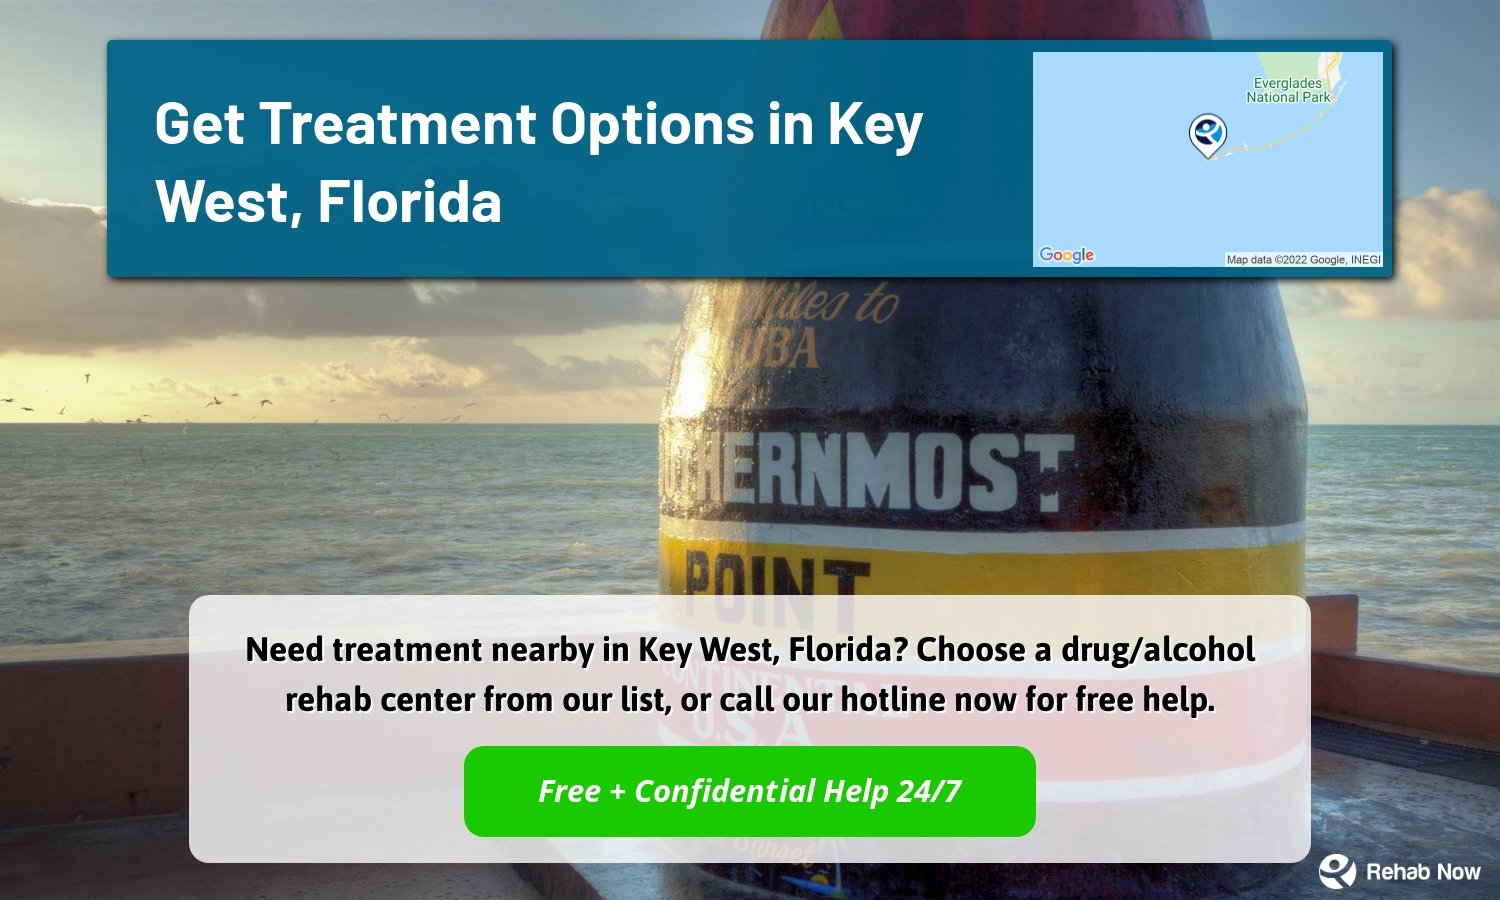 Need treatment nearby in Key West, Florida? Choose a drug/alcohol rehab center from our list, or call our hotline now for free help.